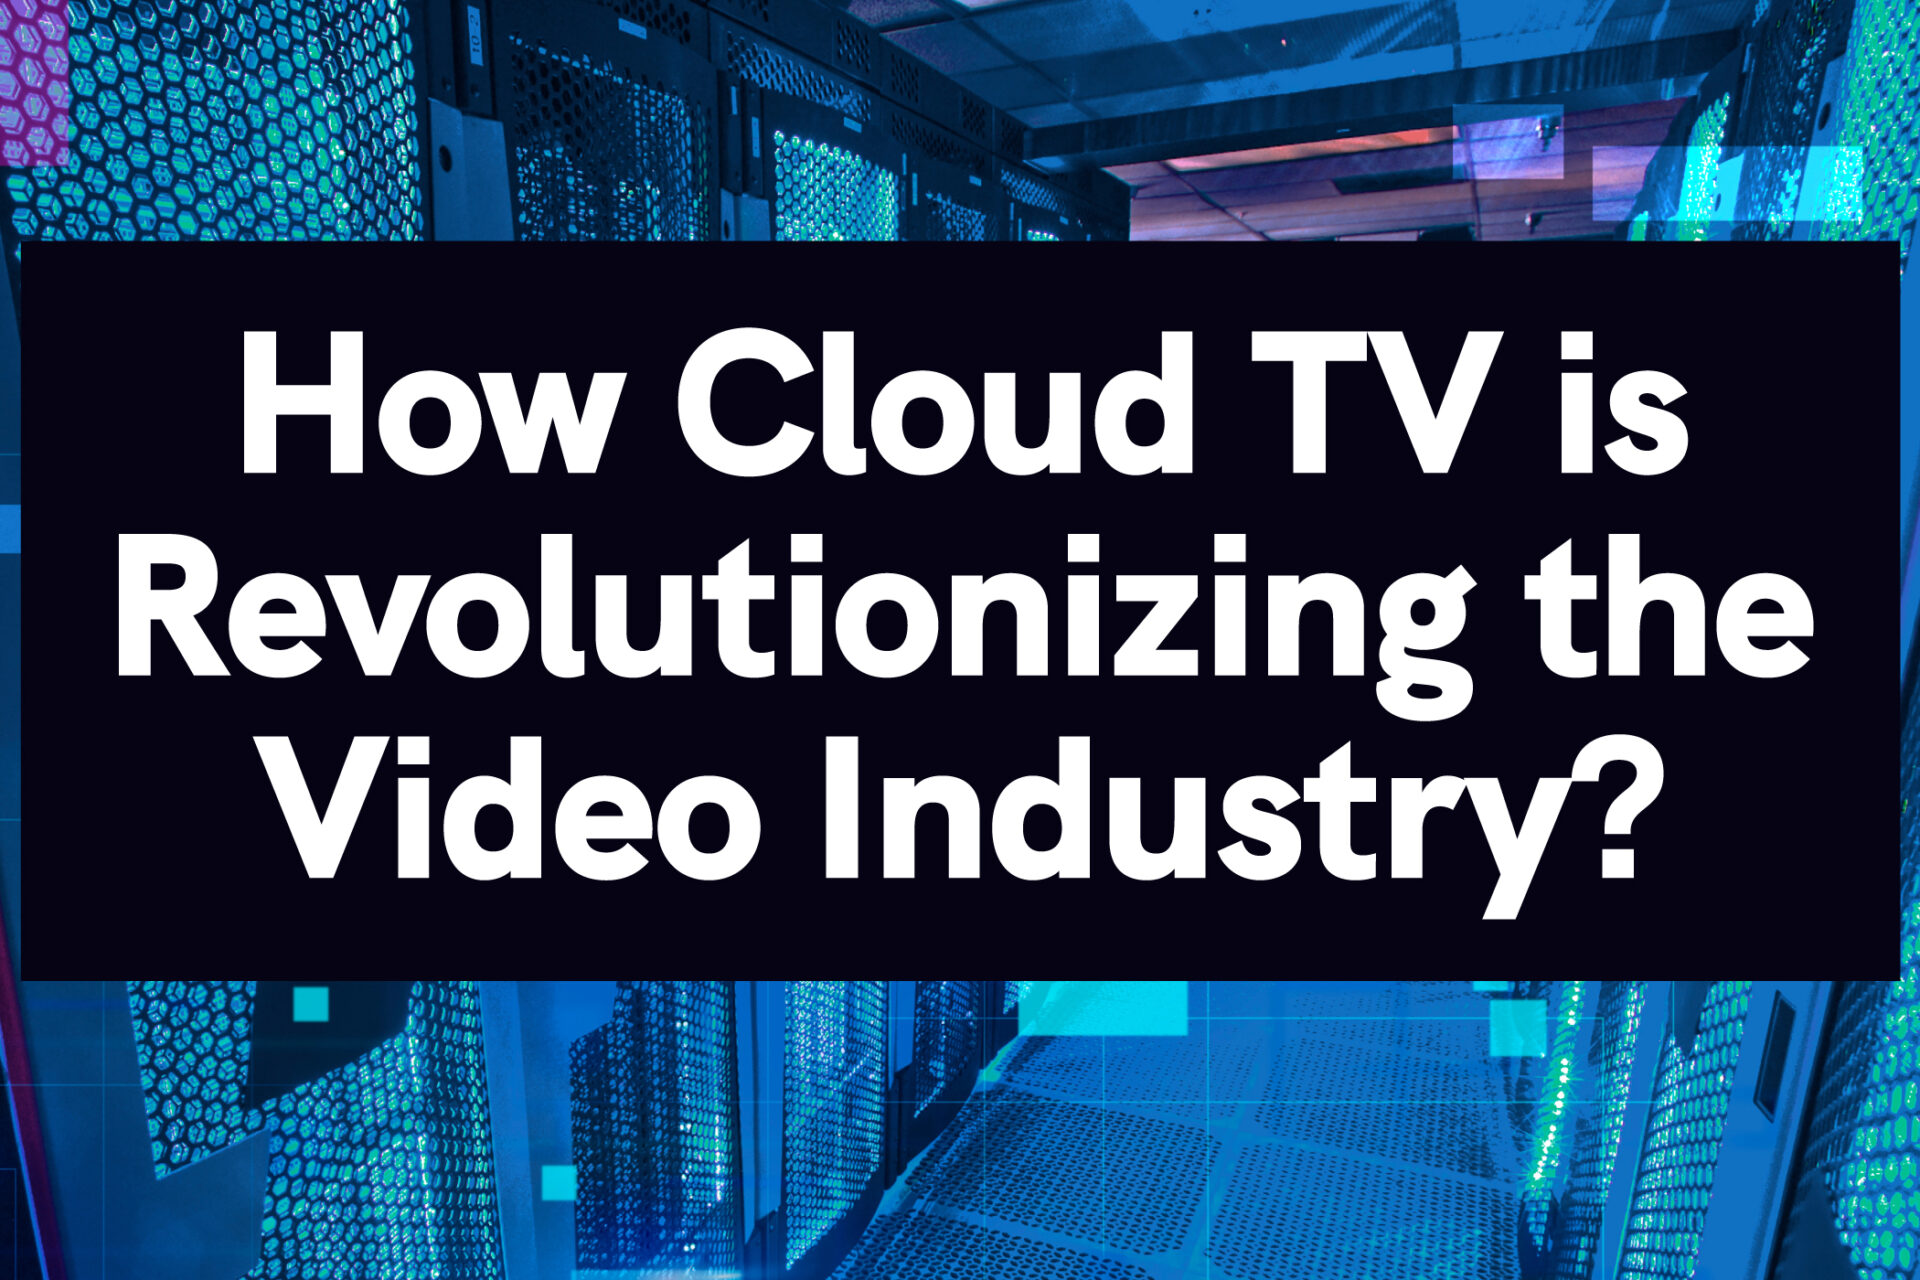 How Cloud TV is Revolutionizing the Video Industry?